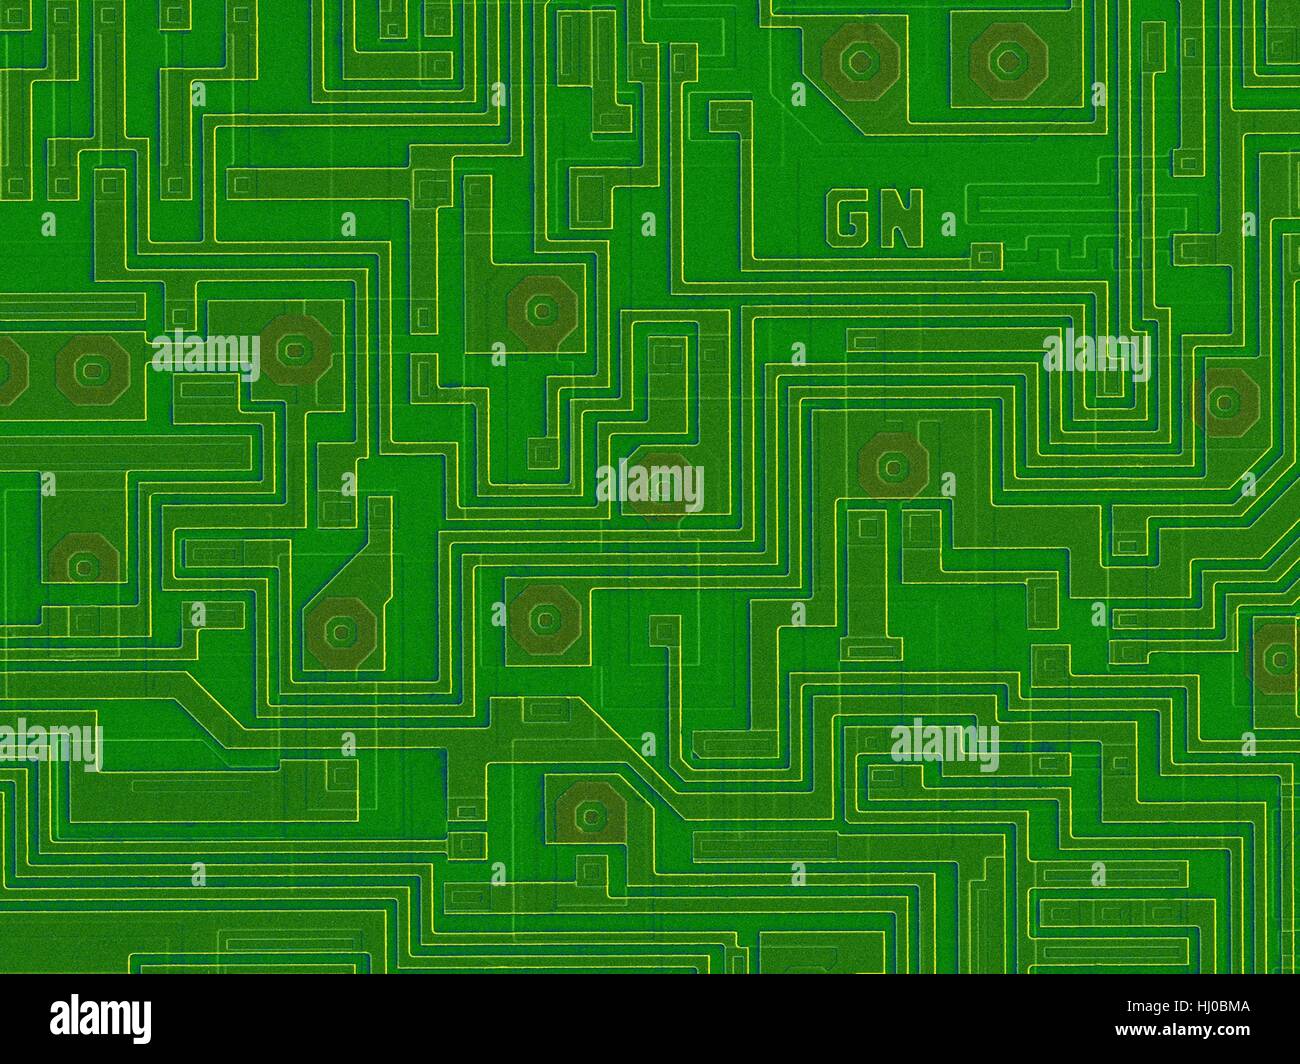 Coloured scanning electron micrograph (SEM) of Computer chip (microchip, microprocessor, integrated circuit) surface. Microchips are solid-state silicon semiconductor components that can process large amounts of data. They are the central part of devices such as computers. This integrated circuit has been made by imprinting microscopic electronic components onto the surface of a wafer of silicon. Integrated circuits can be made much smaller than non-integrated circuits. Magnification: x30 when shortest axis printed at 25 millimetres. Stock Photo